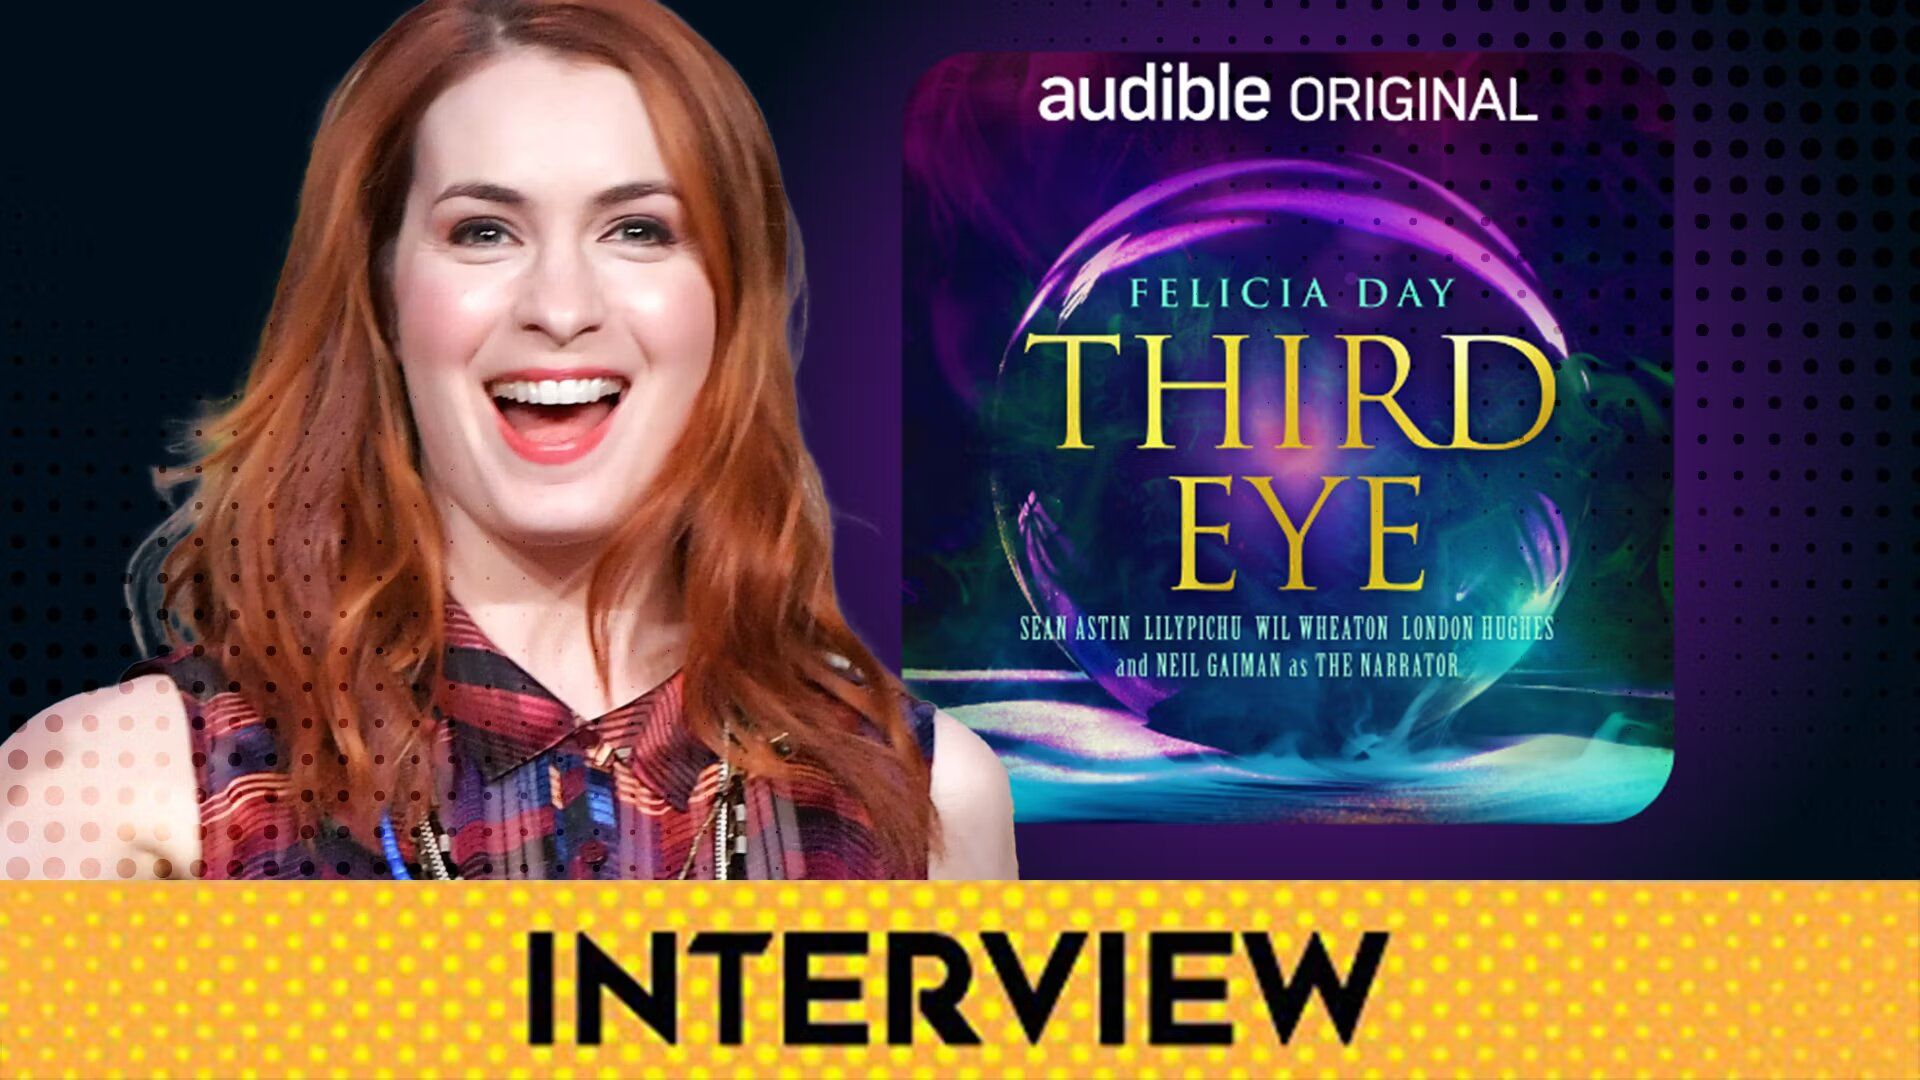 Third Eye: Creator Felicia Day on Her Personal Connection to the Audible Original Series